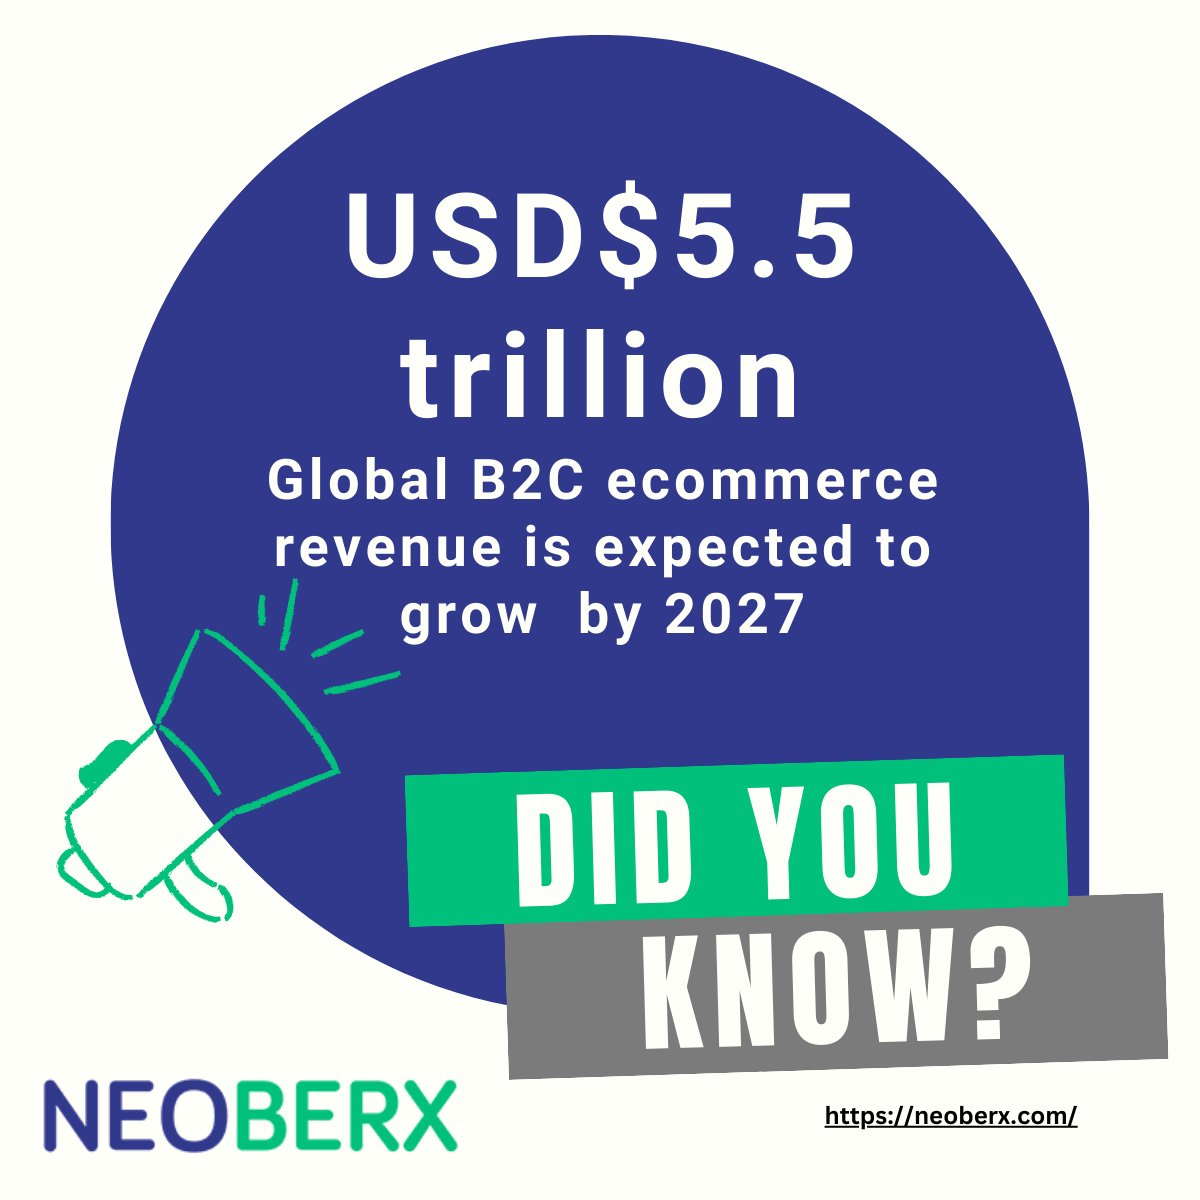 📷 Don't miss the chance to digitize your business and thrive in these booming sectors! Let Neoberx.com be your partner in eCommerce success.

#eCommerce #AdobeCommerce #OnlineShop #retailinnovation #development #FactCheck #FridayVibes #hire #DigitalProducts